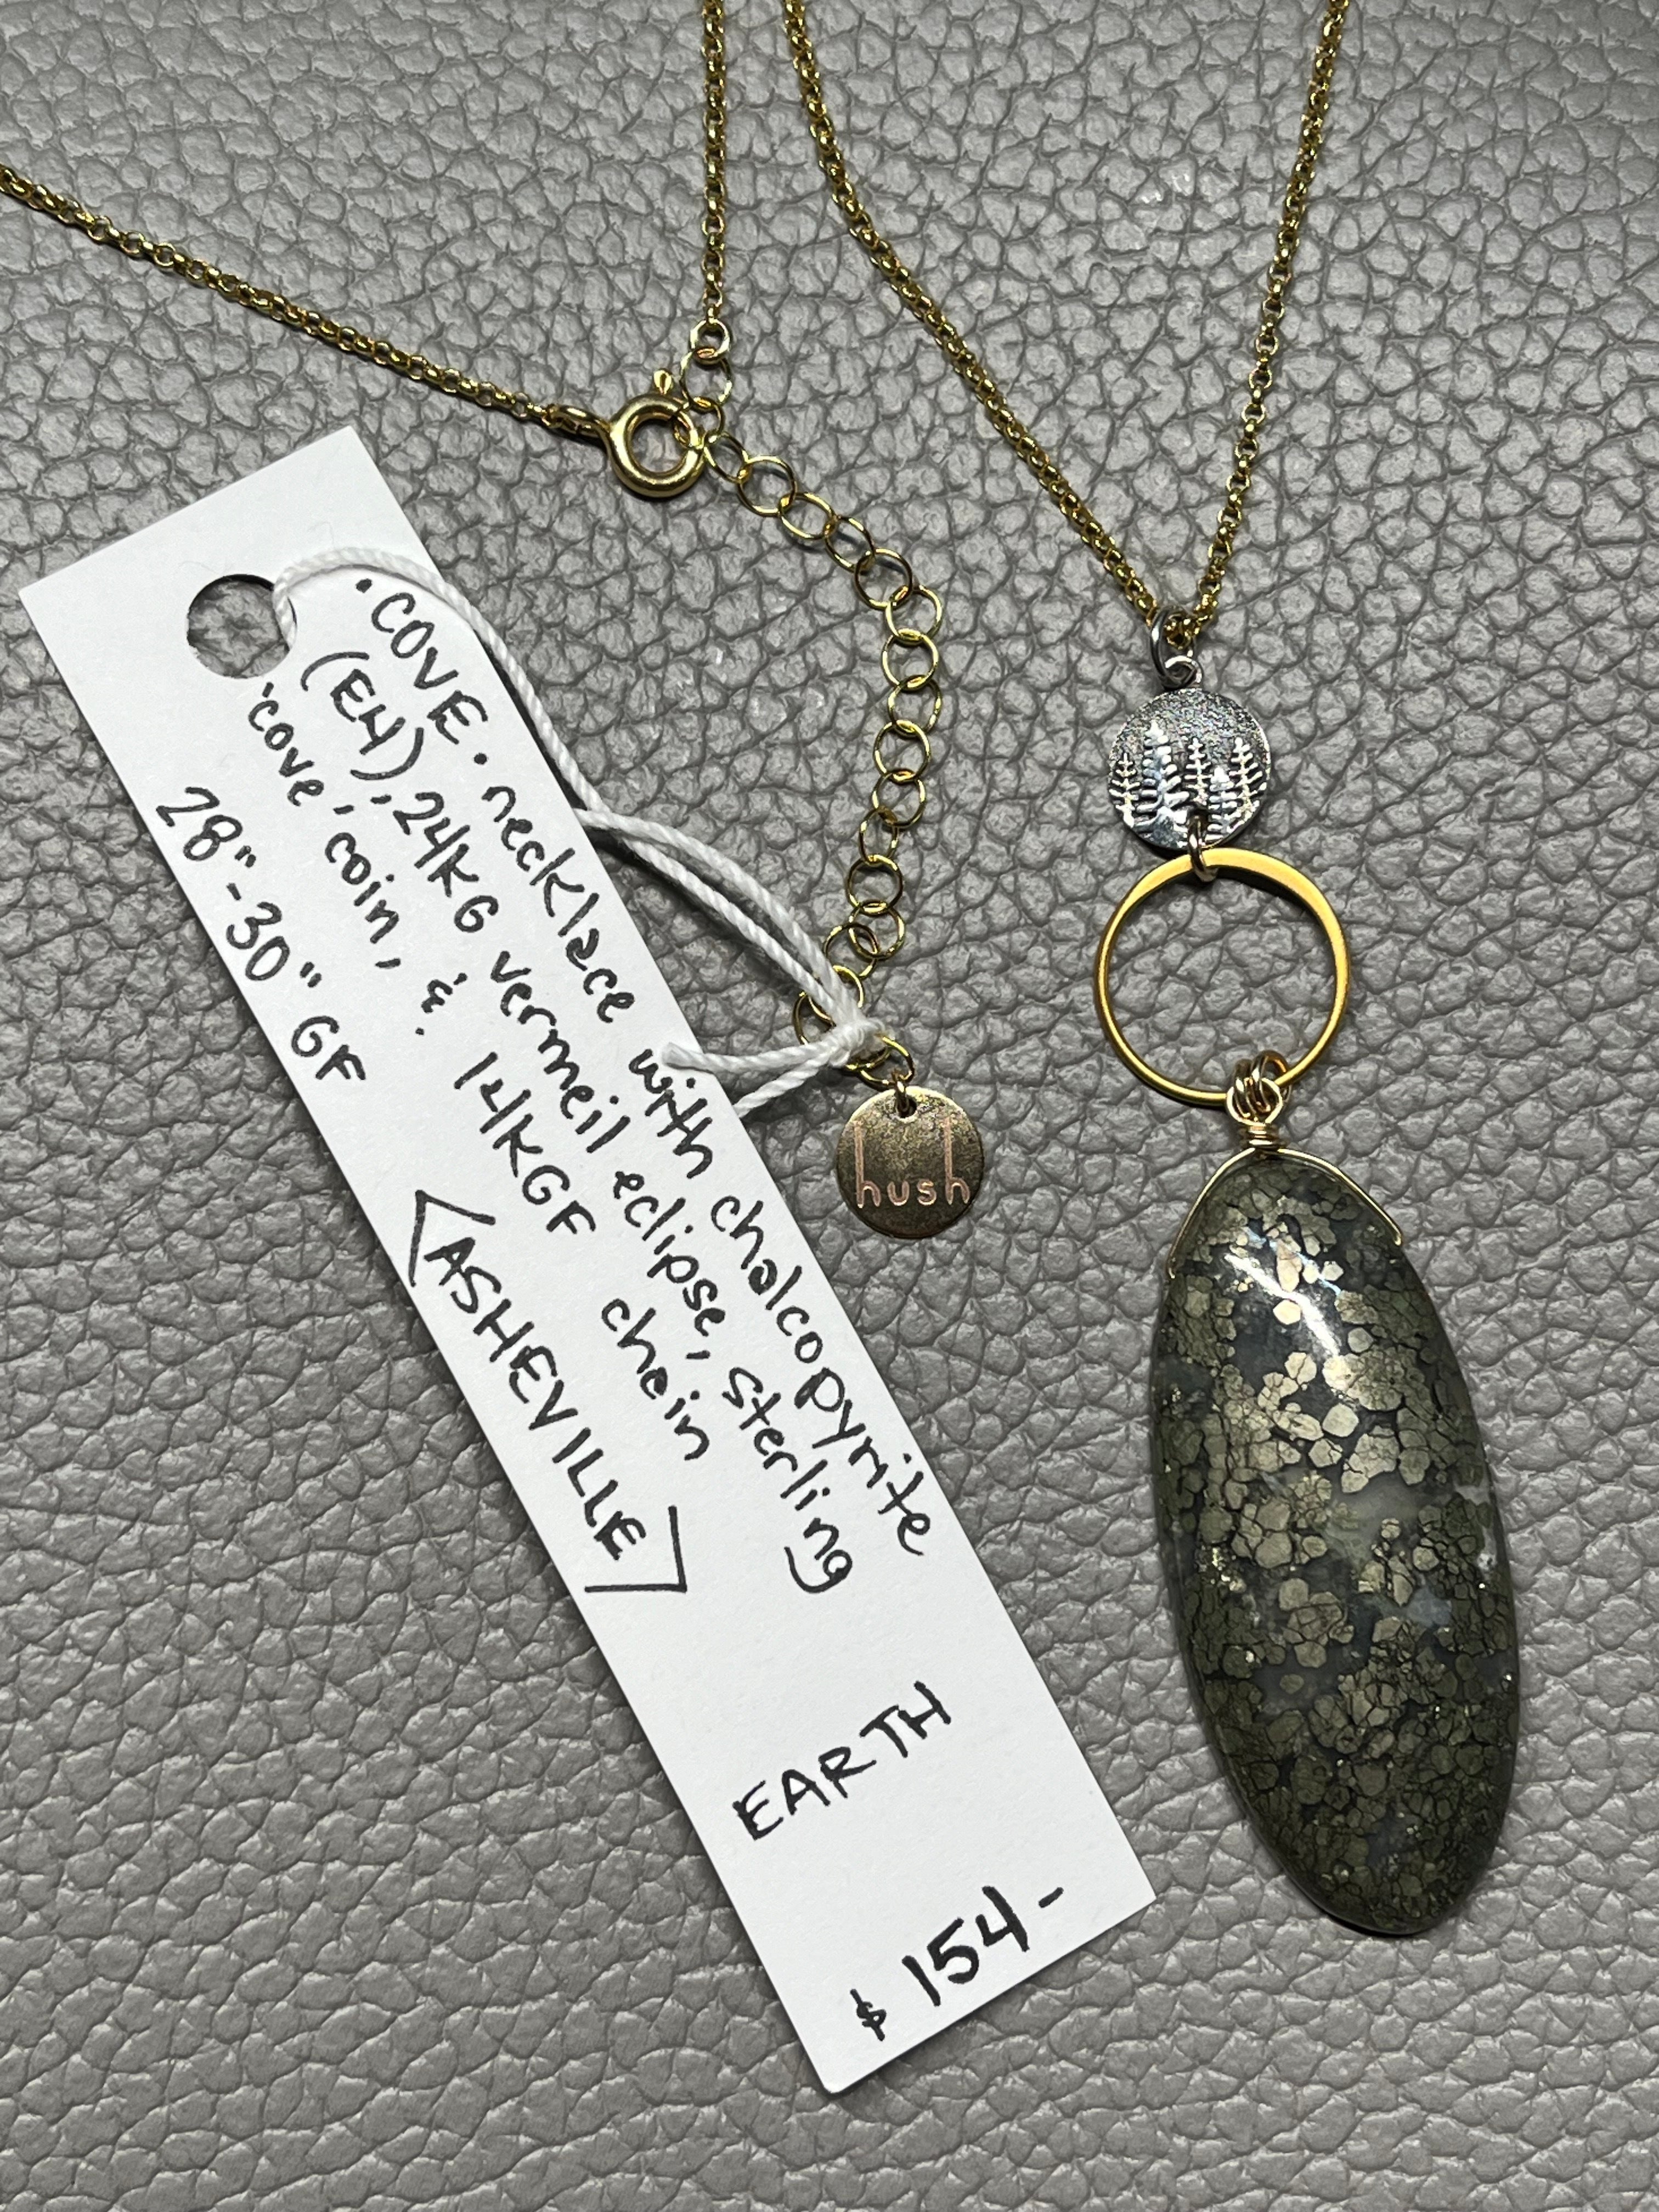 •COVE• chalcopyrite + cosmic cove eclipse + mixed metal necklace (28"-30")